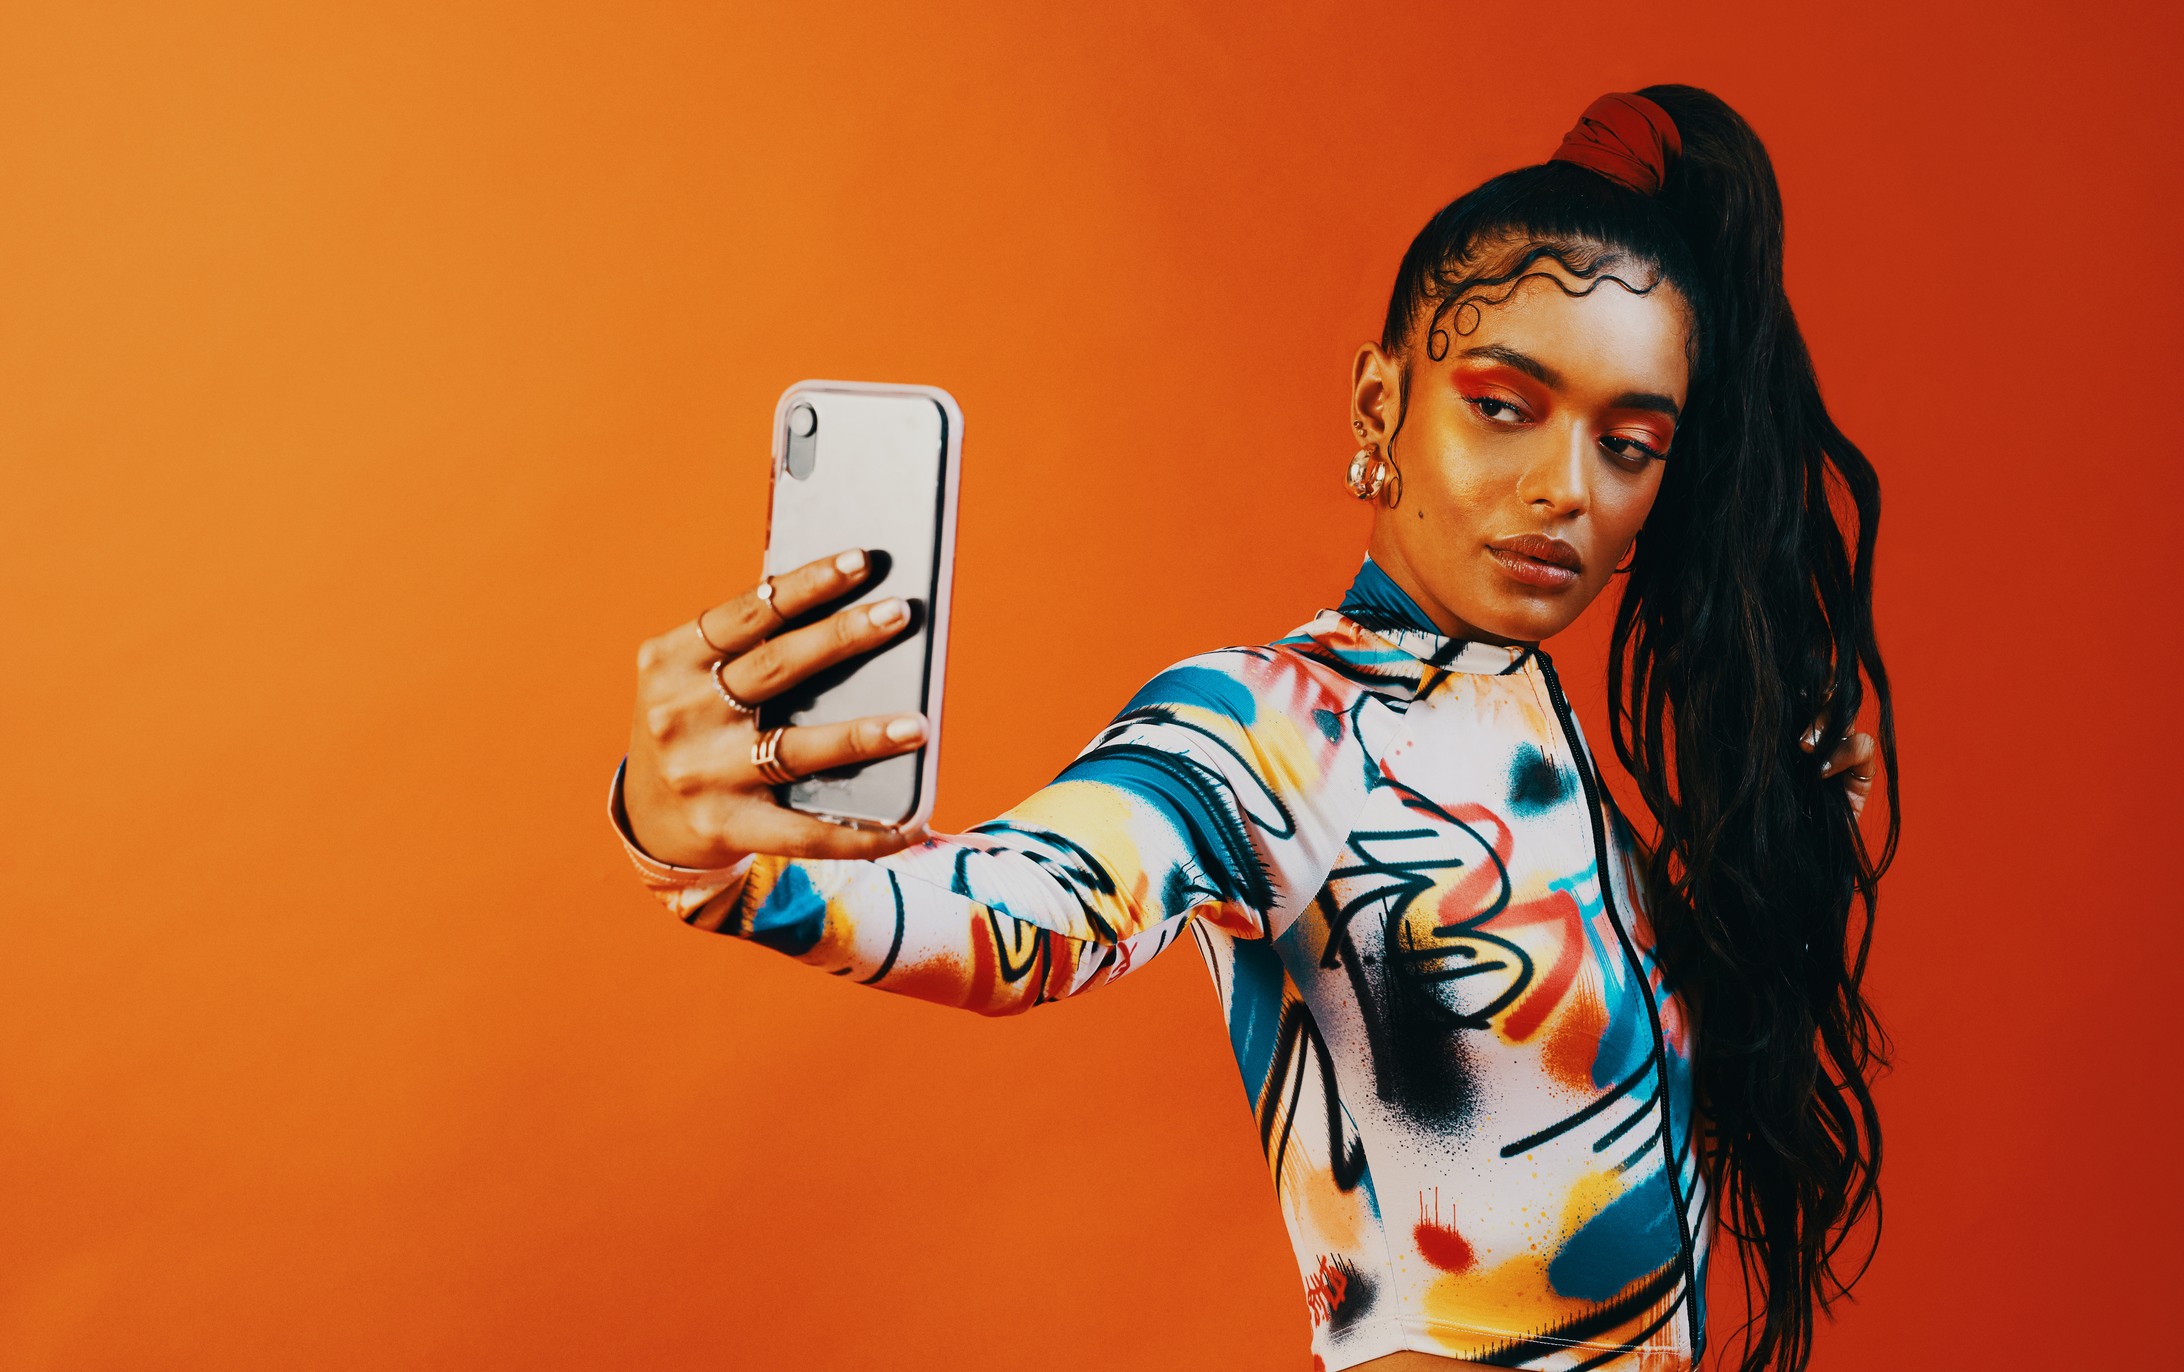 Studio shot of a fashionable woman taking a selfie against a orange background (Foto: Getty Images)